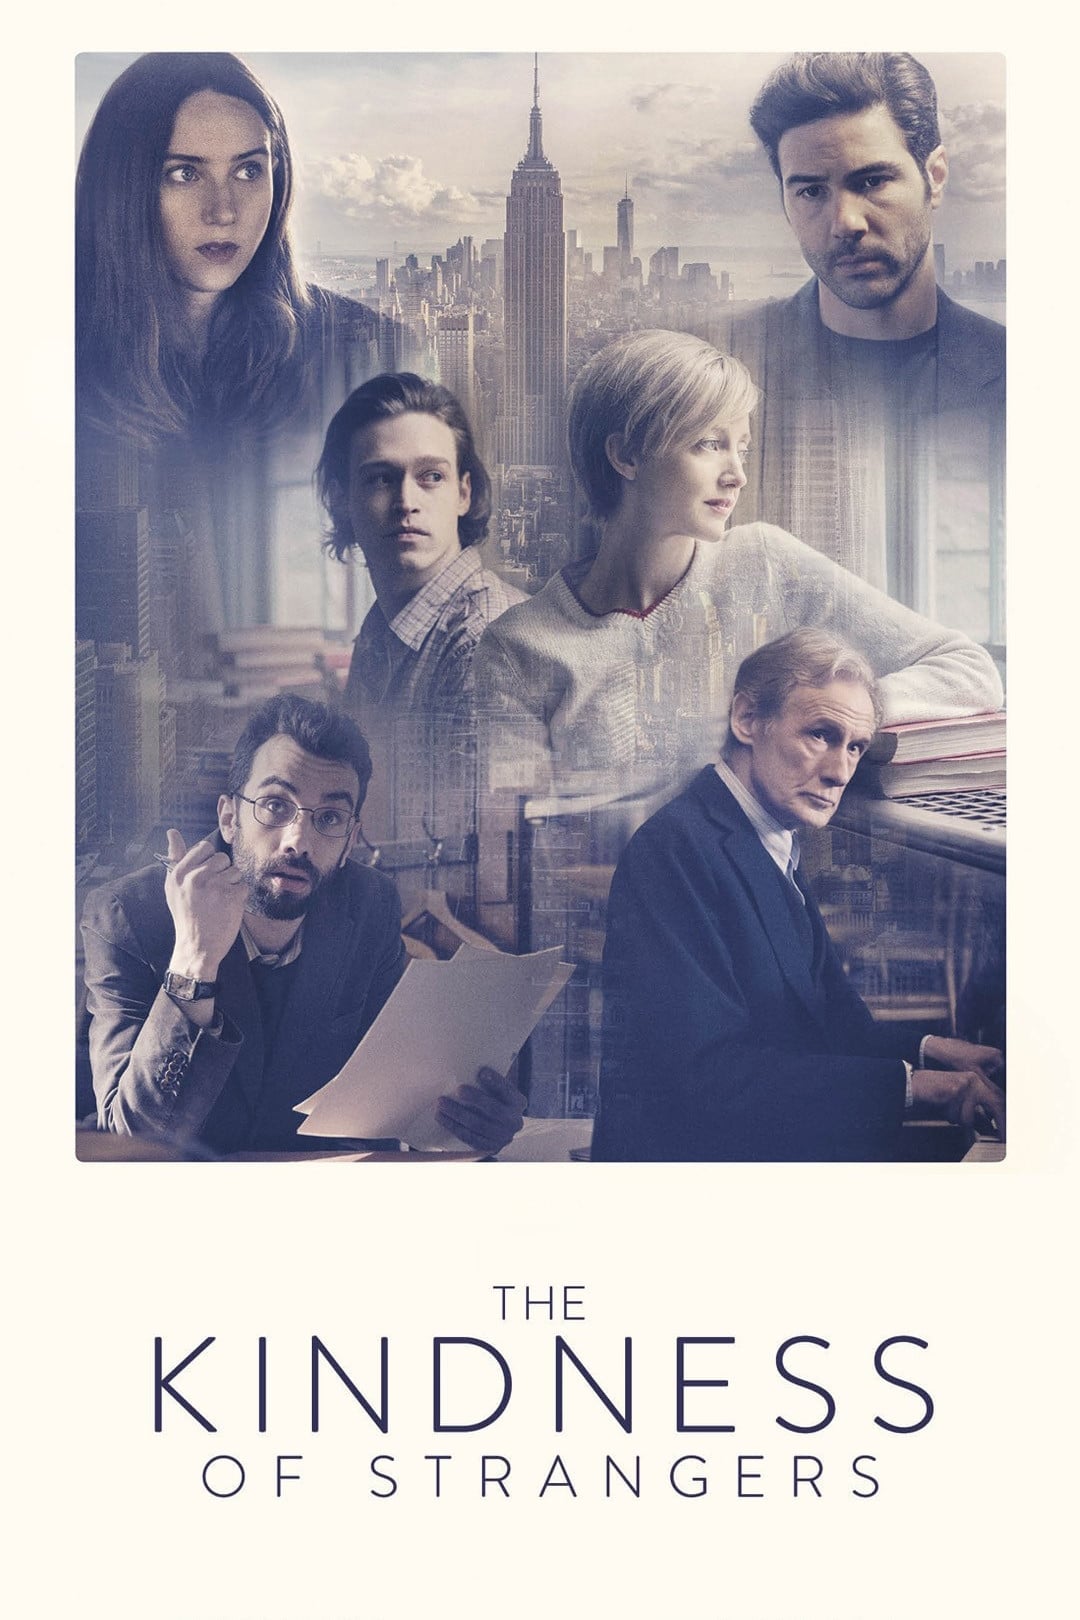 The Kindness of Strangers (2019)